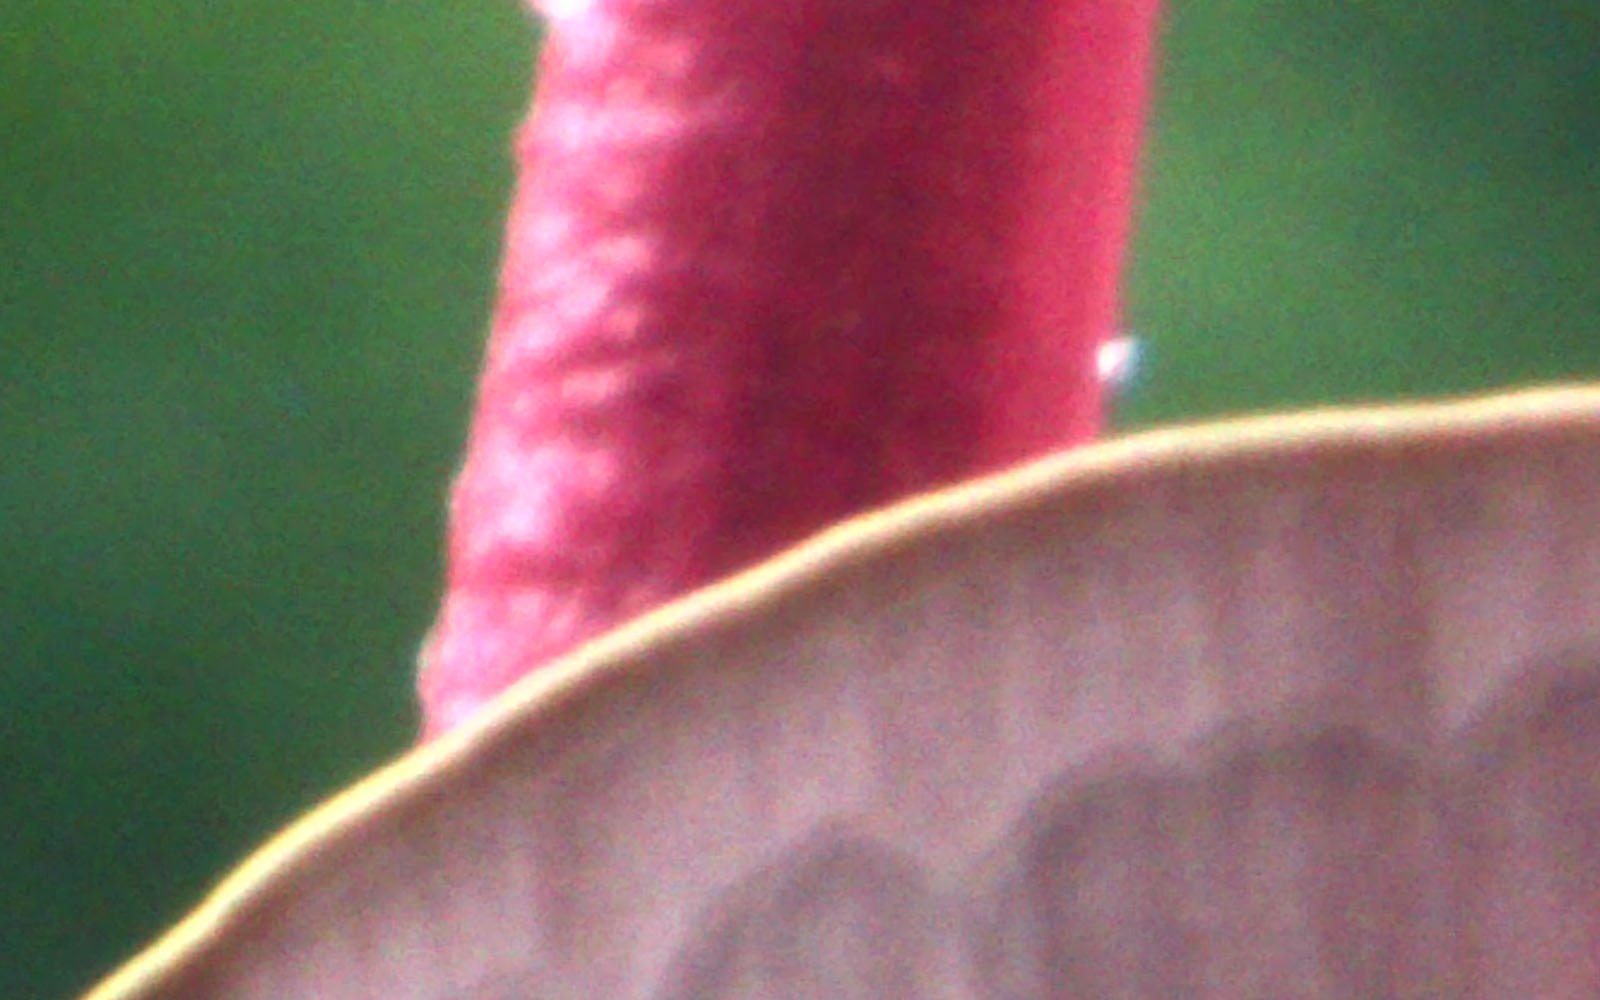 Blurred close-up image featuring part of a red object with a smooth texture and a brown curved edge possibly part of a leaf or petal, set against a soft green background.